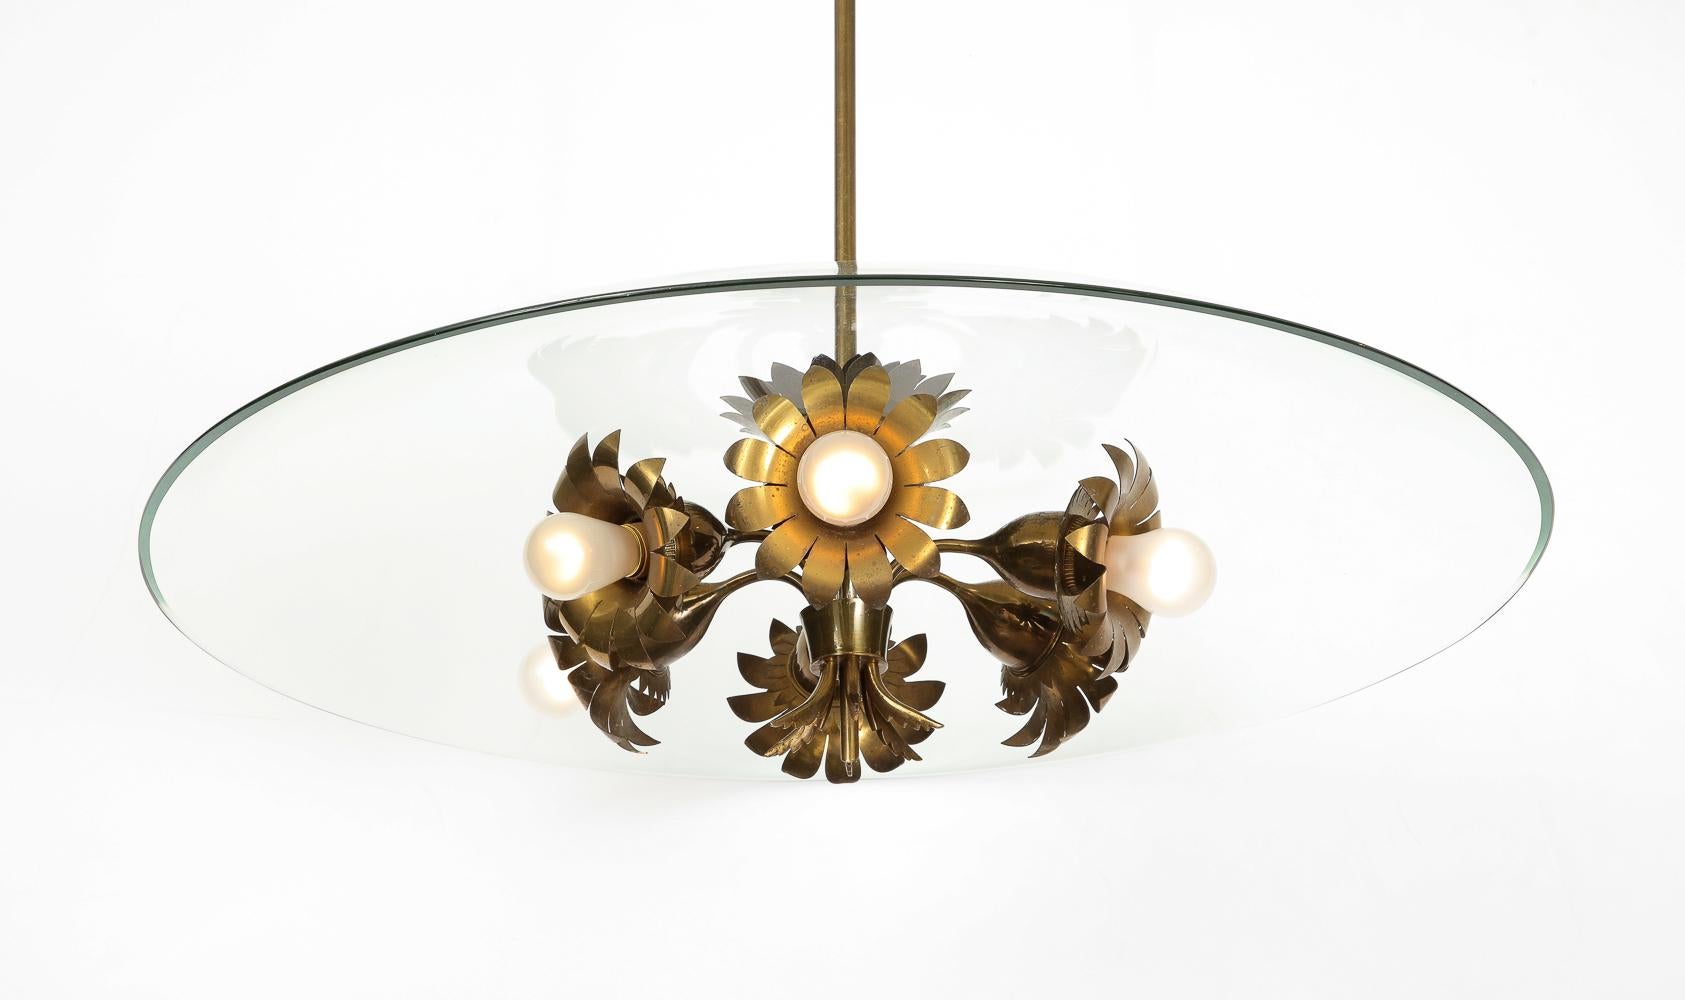 Hand-Crafted Pietro Chiesa Fixture